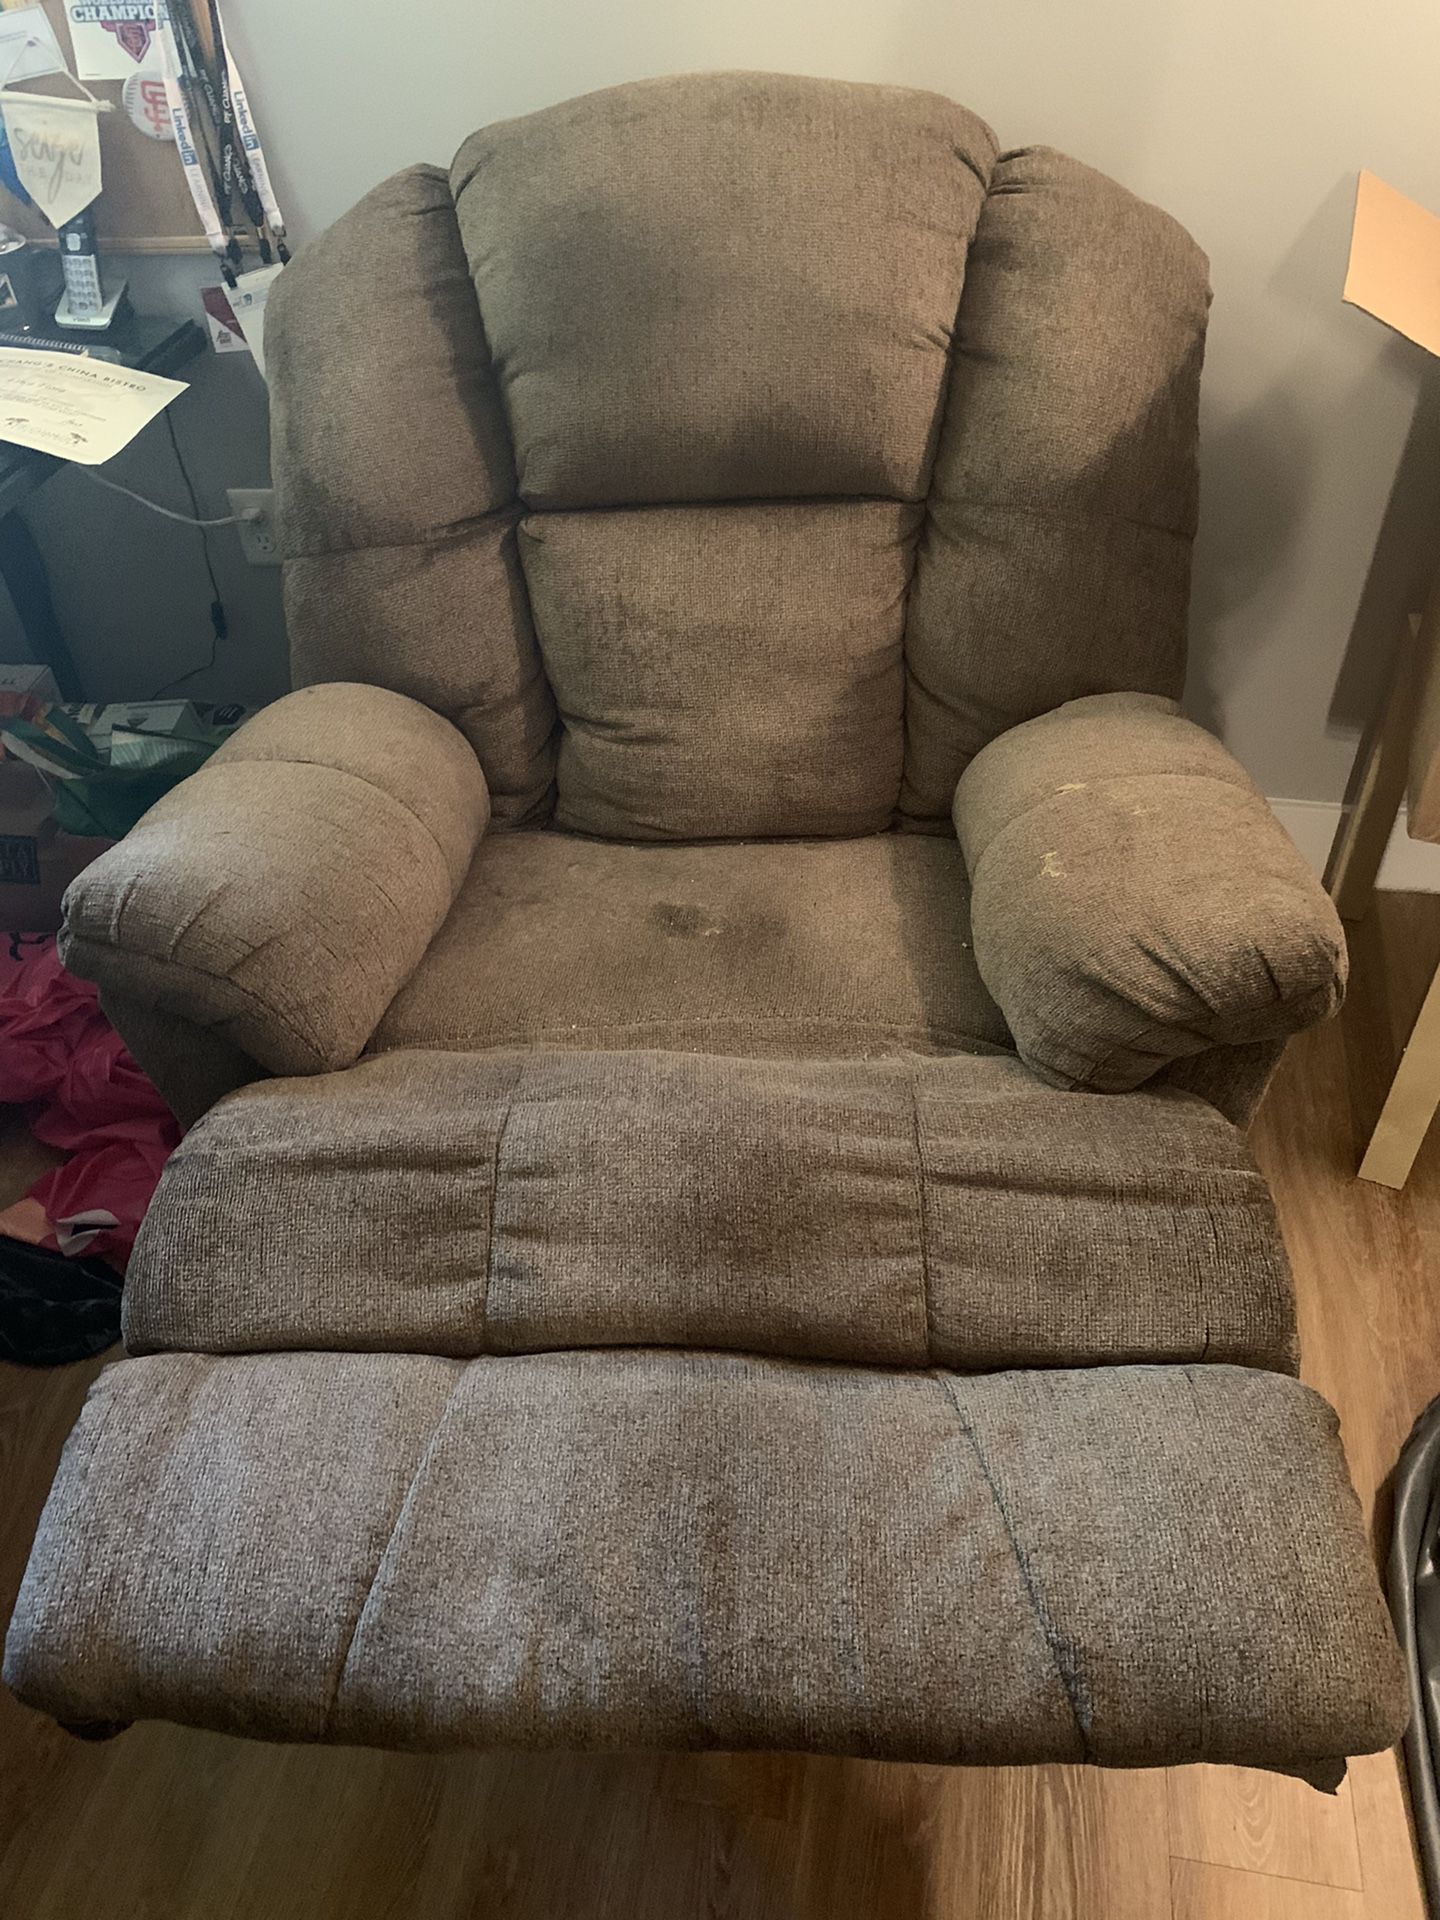 Recliner chair - FREE- needs cleaning- must pick up today